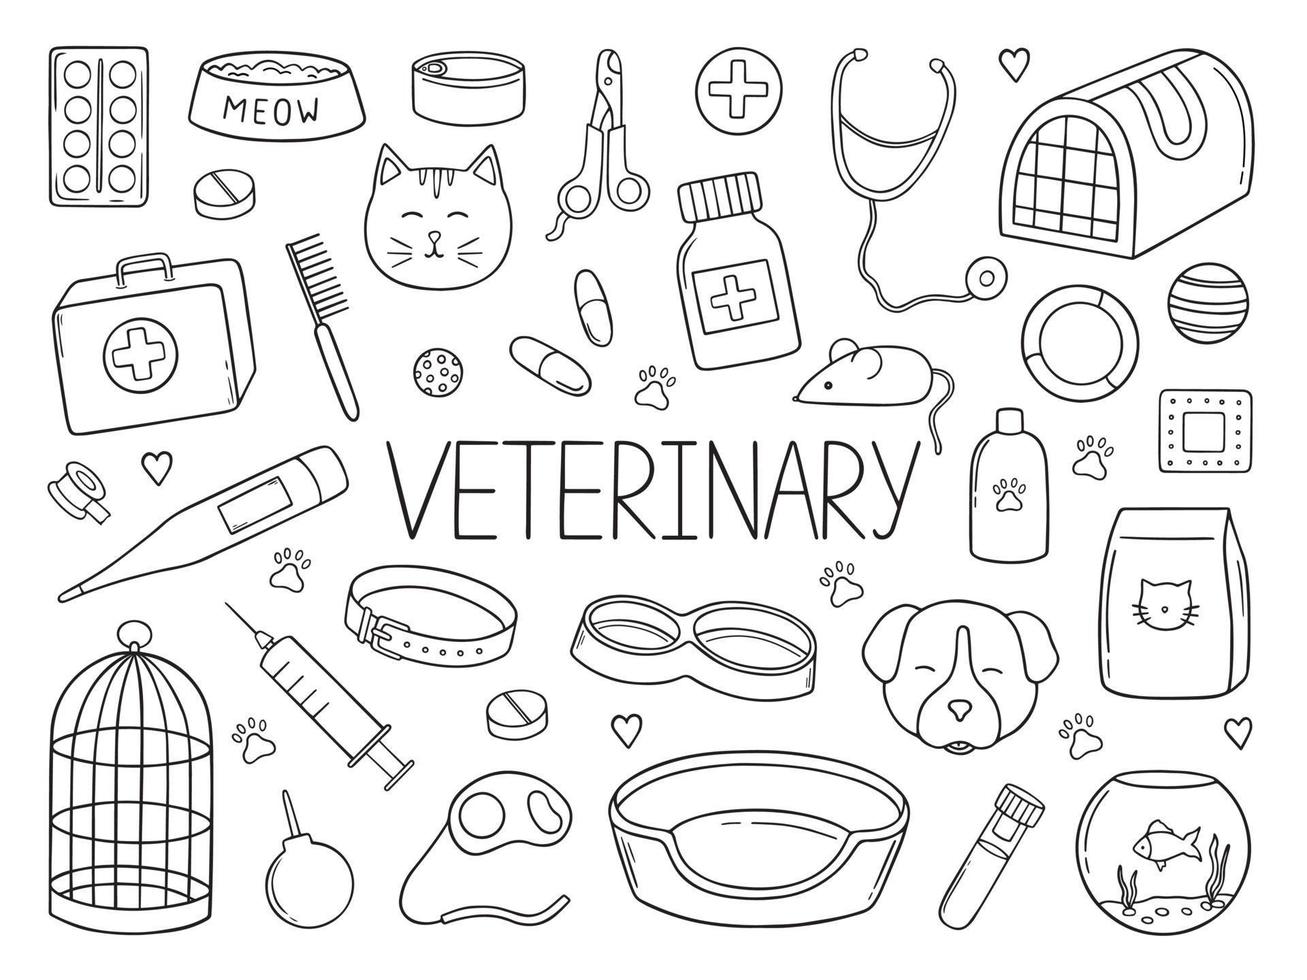 Hand drawn set of Pets veterinary doodle. Supplies and accessories for dogs and cats in sketch style. Bowl, toys, collar, food, kennel. Vector illustration isolated on white background.